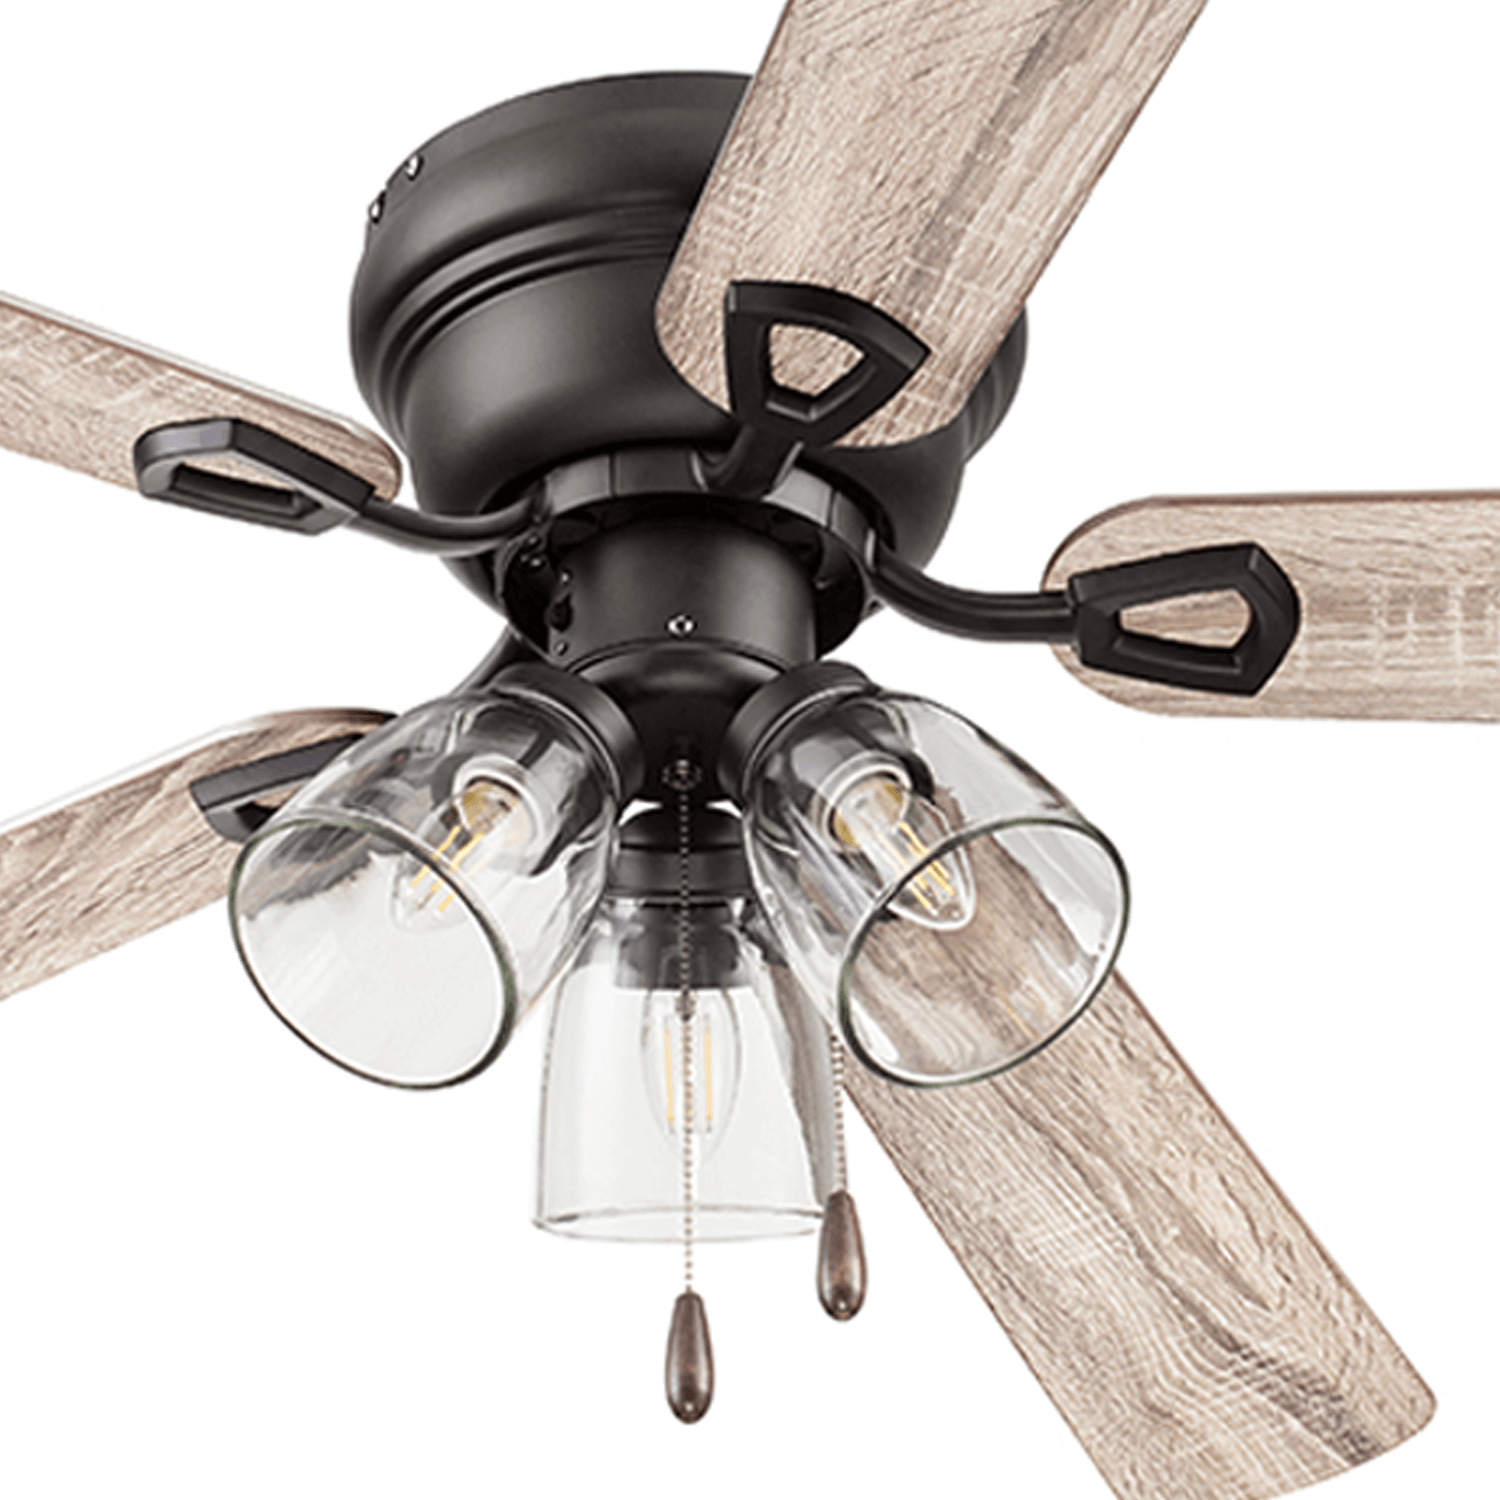 52 Inch Renton, Espresso Bronze, Pull Chain, Ceiling Fan by Prominence Home